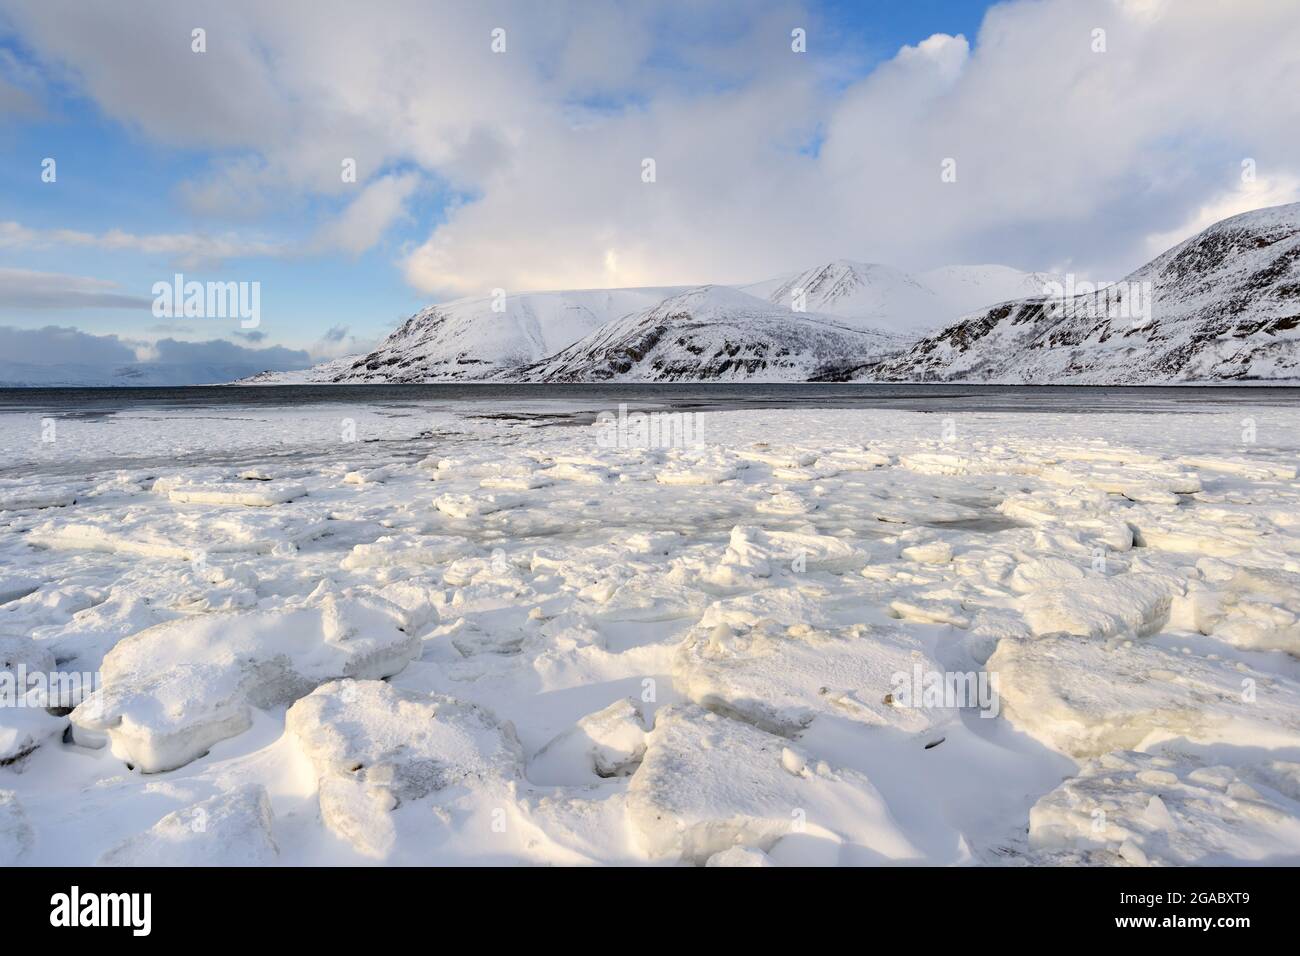 Bay with upcoming ice on the shore, Norway. Stock Photo